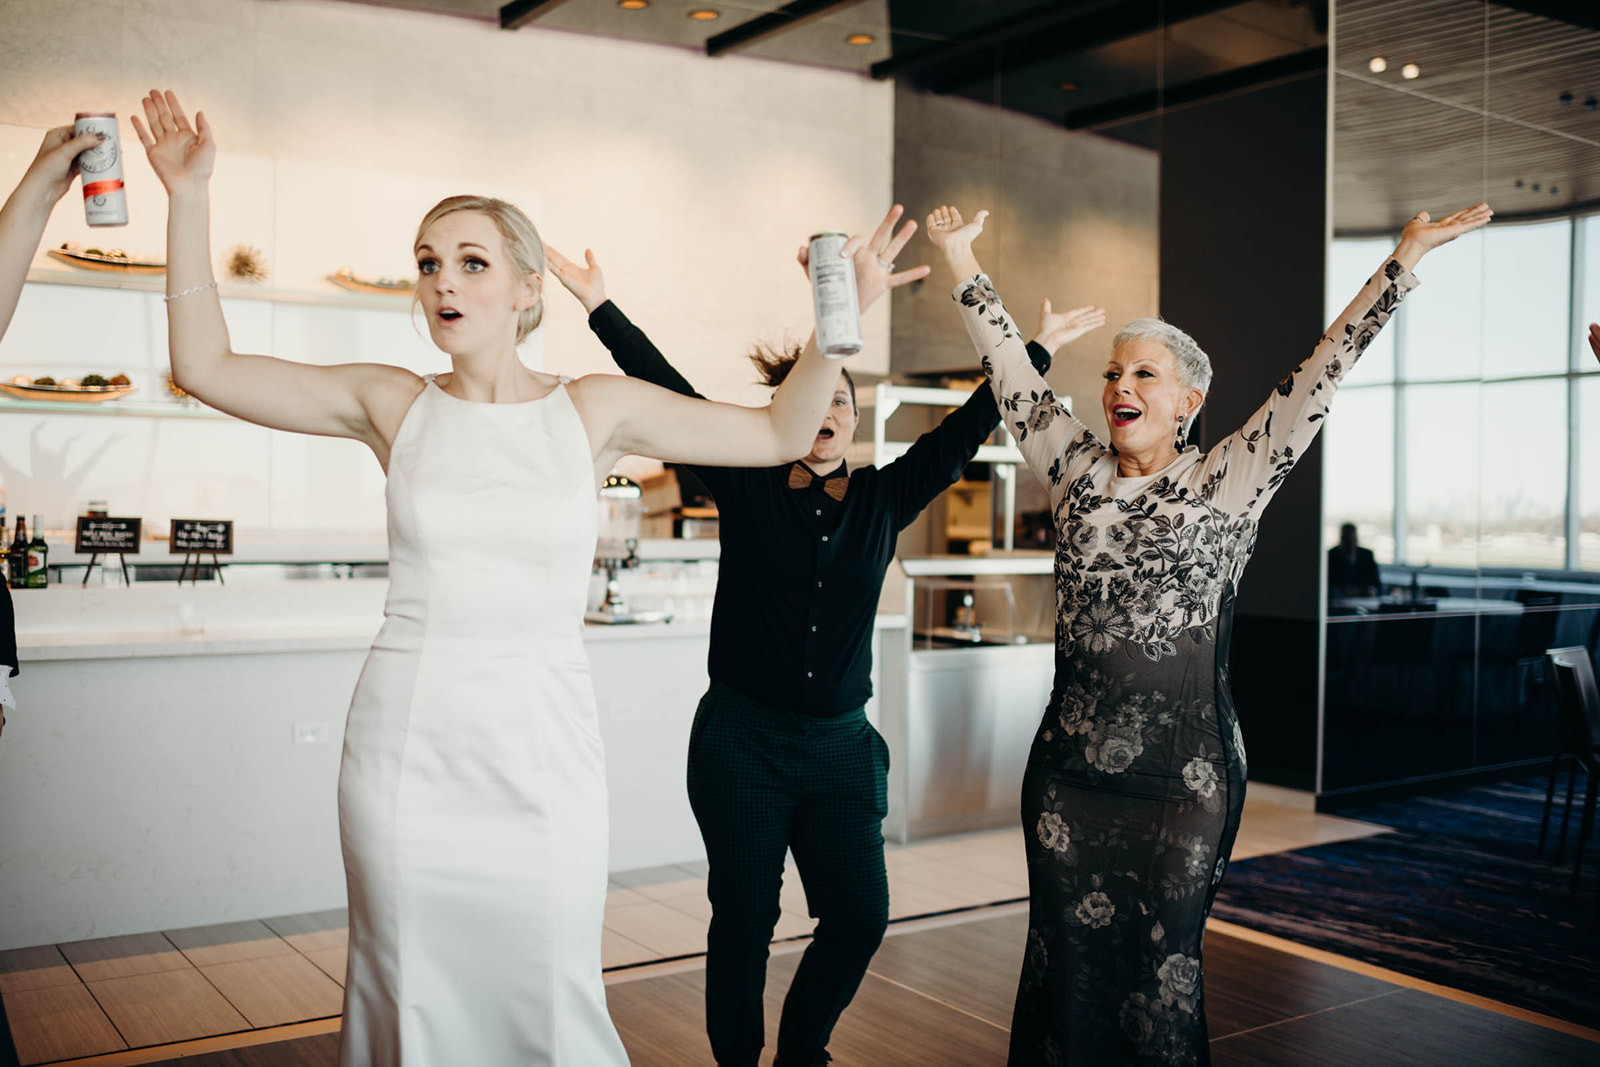 Bride dances with mother at wedding reception